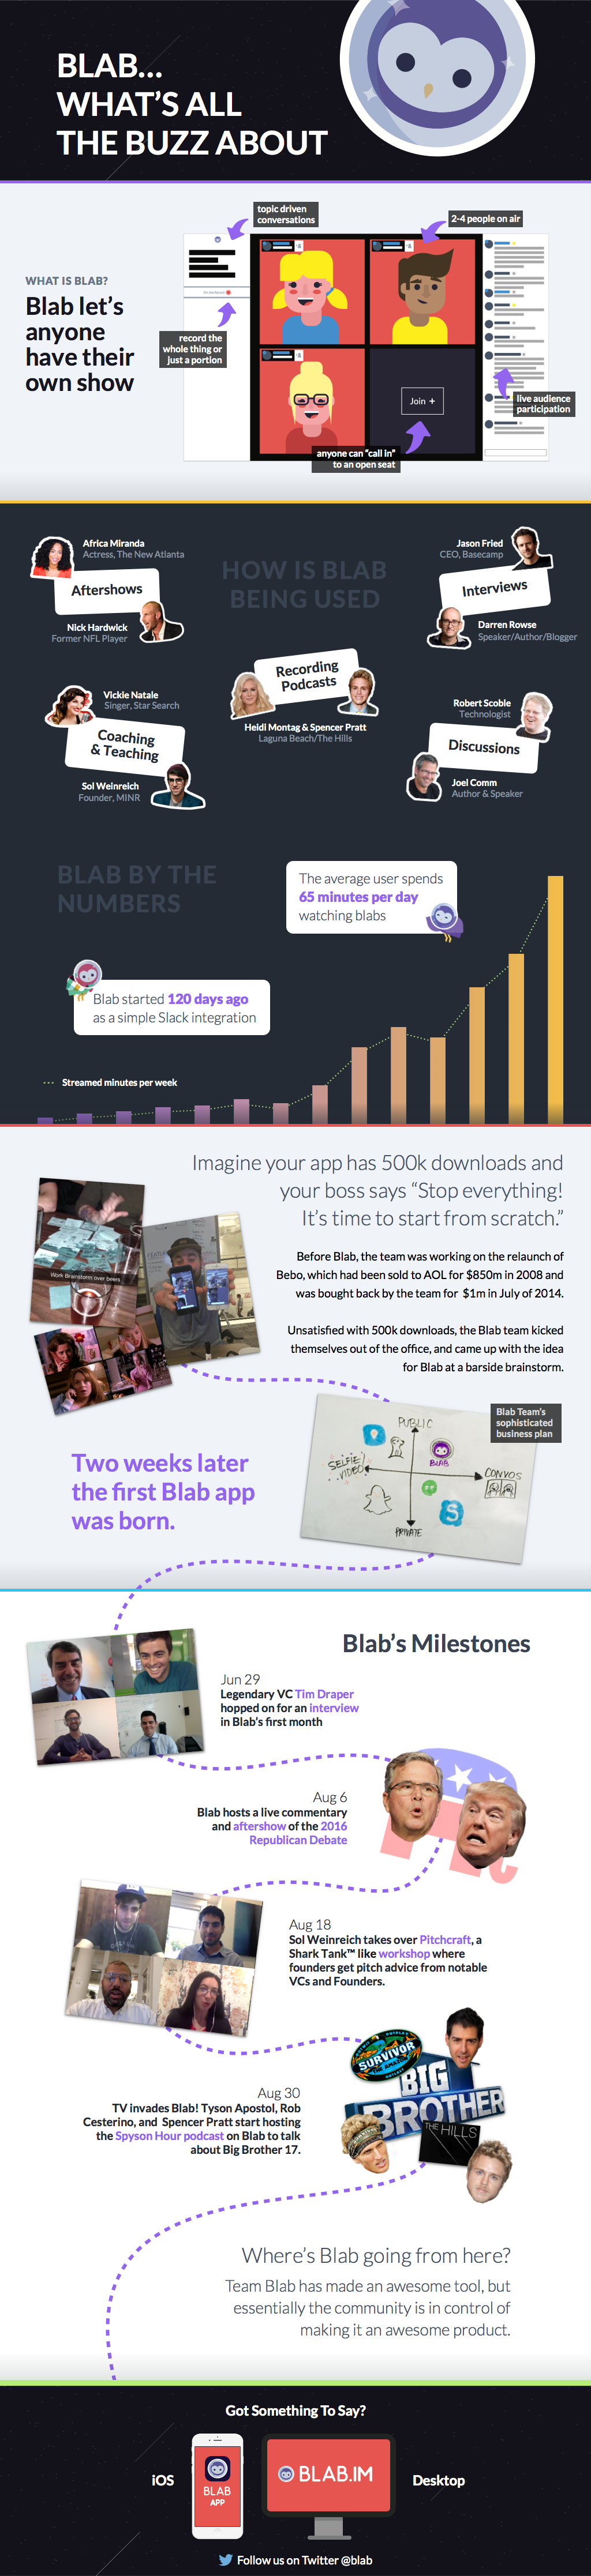 blab_infographic_wide